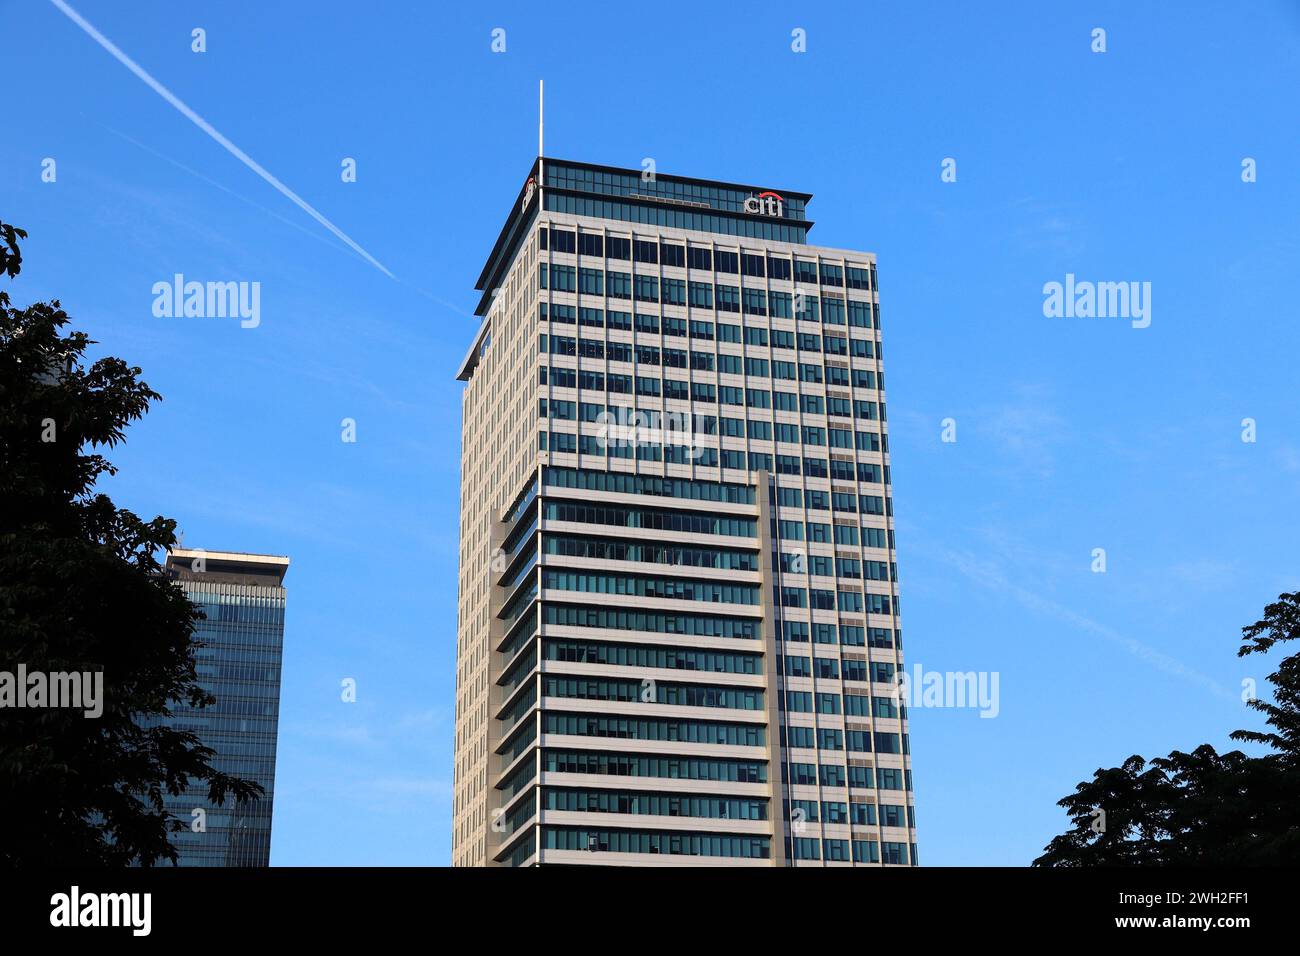 TAIPEI, TAIWAN - DECEMBER 3, 2018: Walsin Lihwa Building, or Citibank Tower office building in Xinyi district, Taipei city. Stock Photo